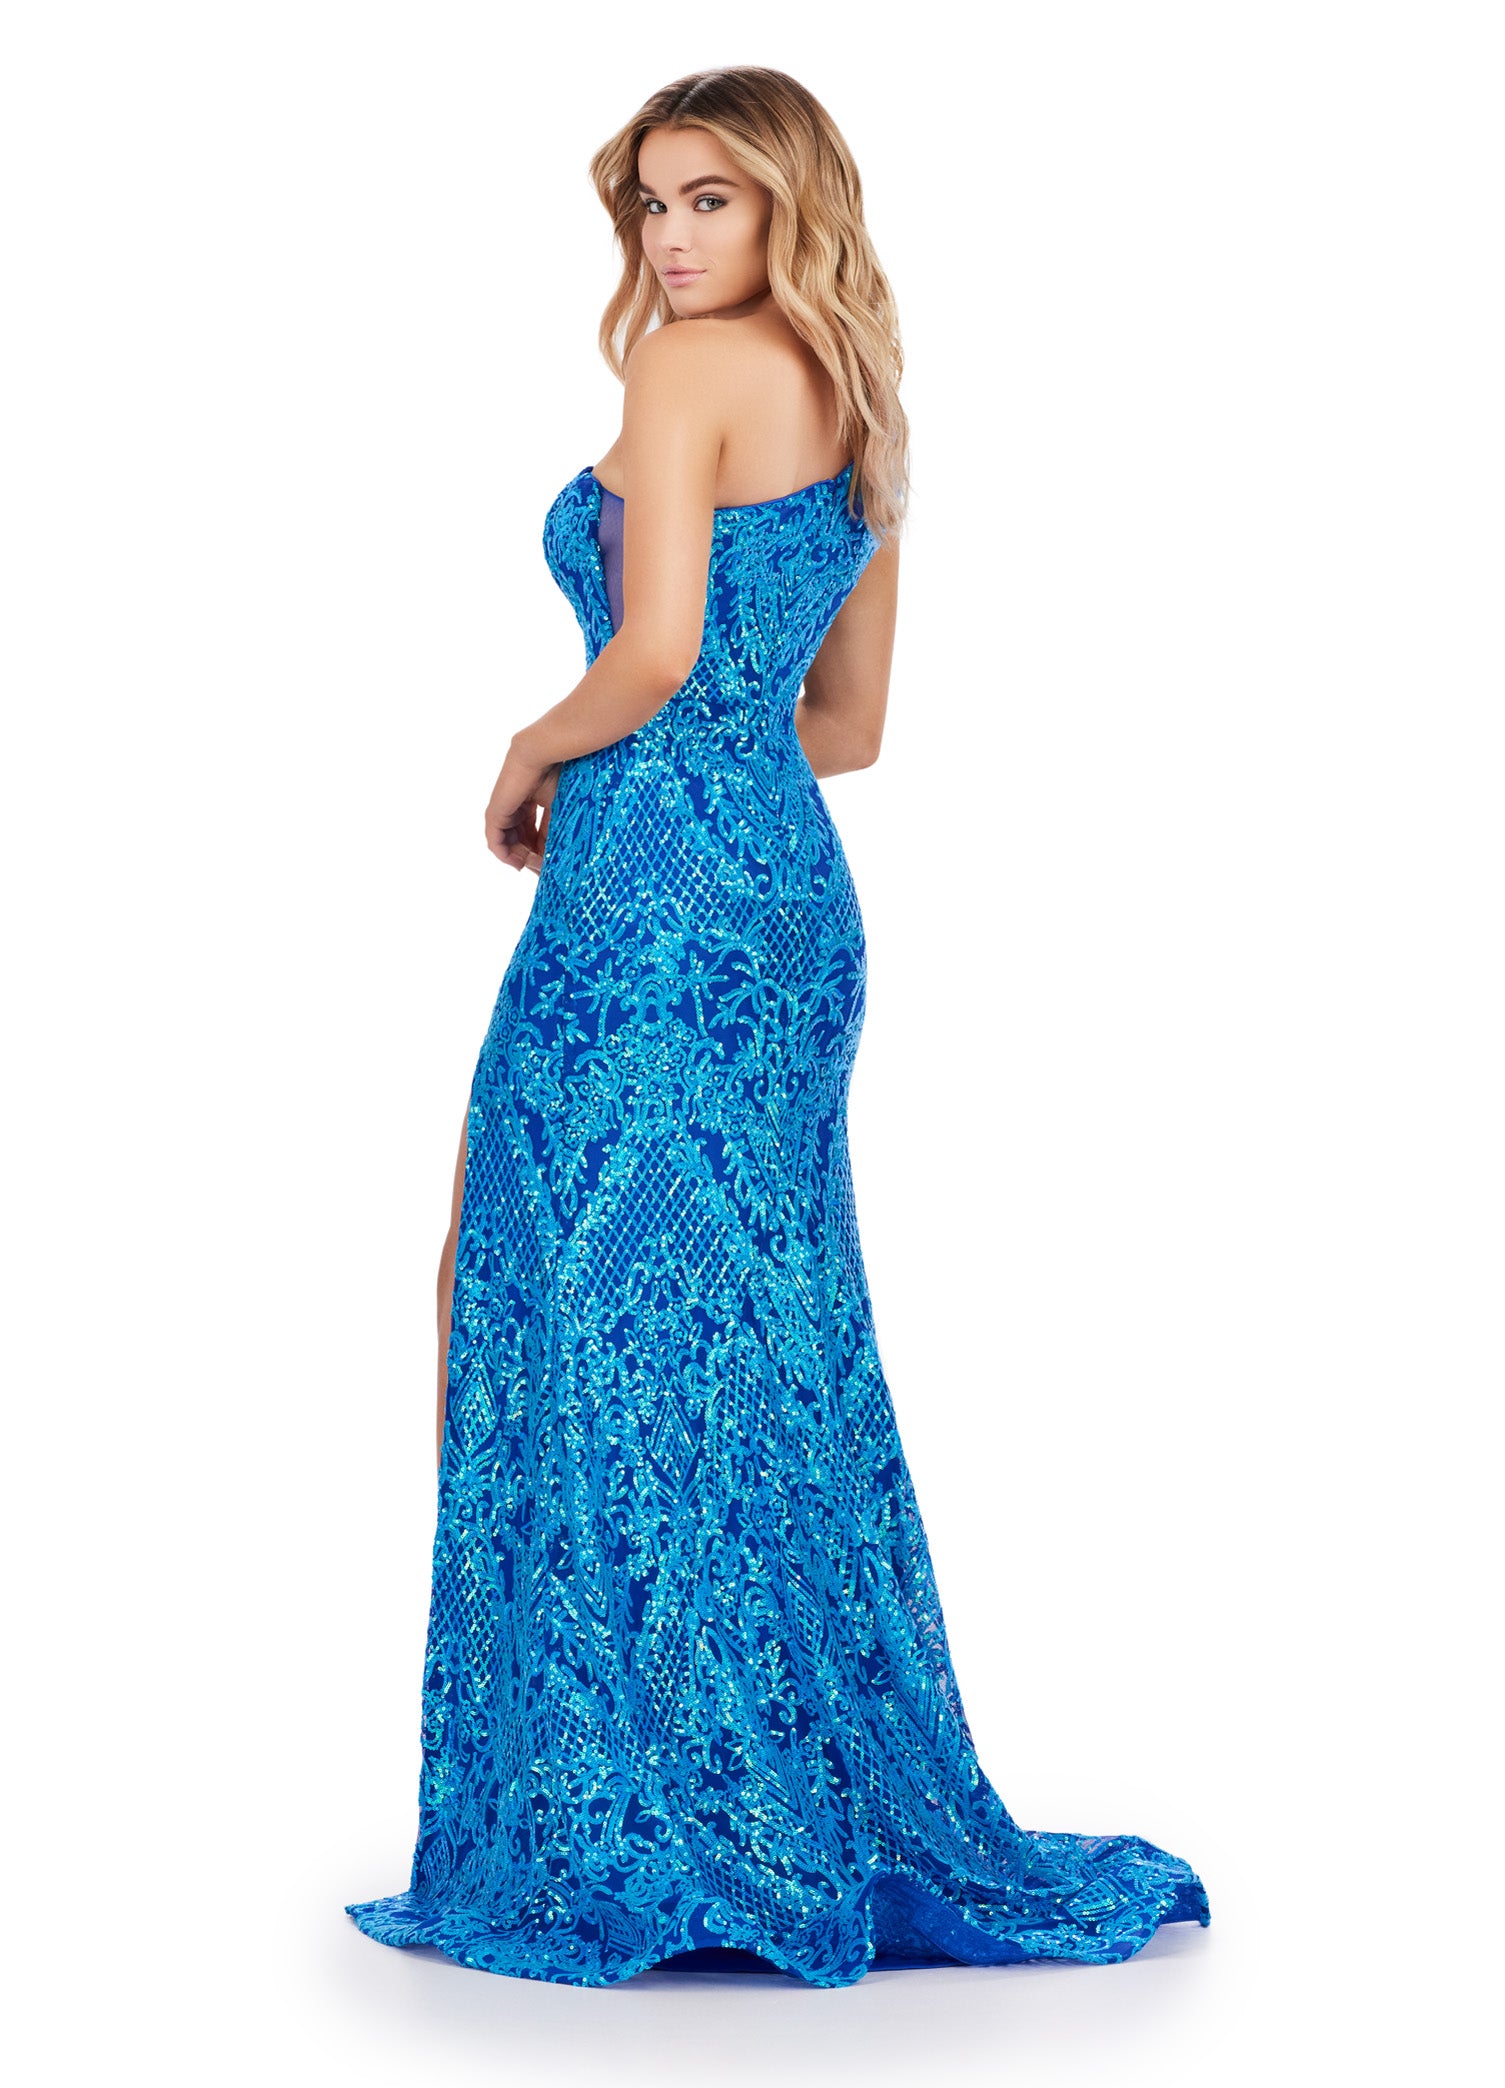 The Ashley Lauren 11471 Long Prom Dress is expertly crafted with a fitted one shoulder design and stretch sequin material, creating a stunning formal pageant gown. Stand out with its sleek silhouette and comfortable fit, perfect for your next special occasion. This memorable one shoulder stretch sequin gown features an illusion cut out side and left leg slit.